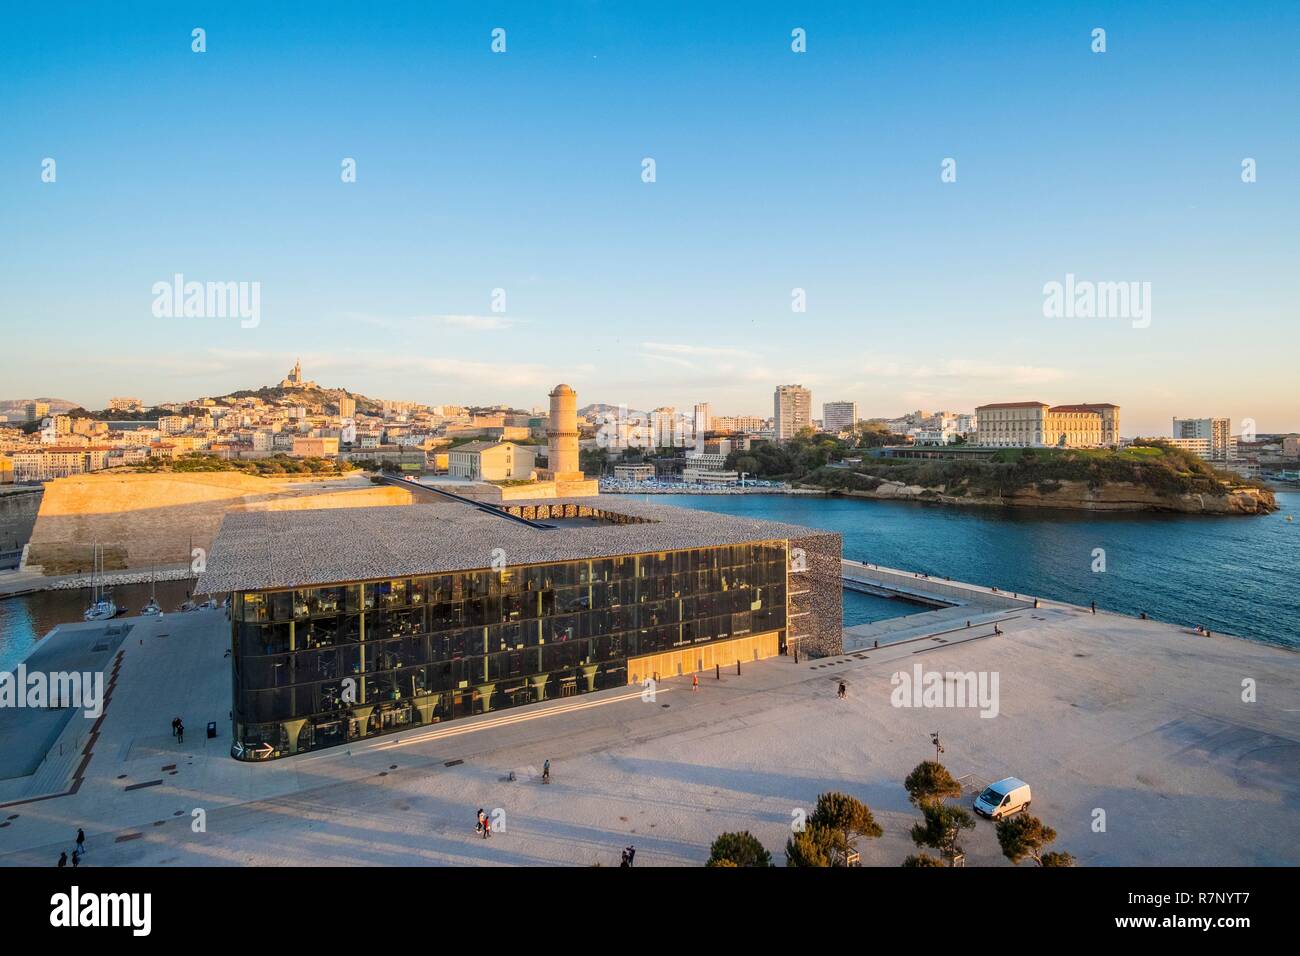 France, Bouches du Rhone, Marseille, general view with the Mucem by the architects Rudy Ricciotti and R. Carta, Fort Saint Jean and the Pharo Palace (aerial view) Stock Photo